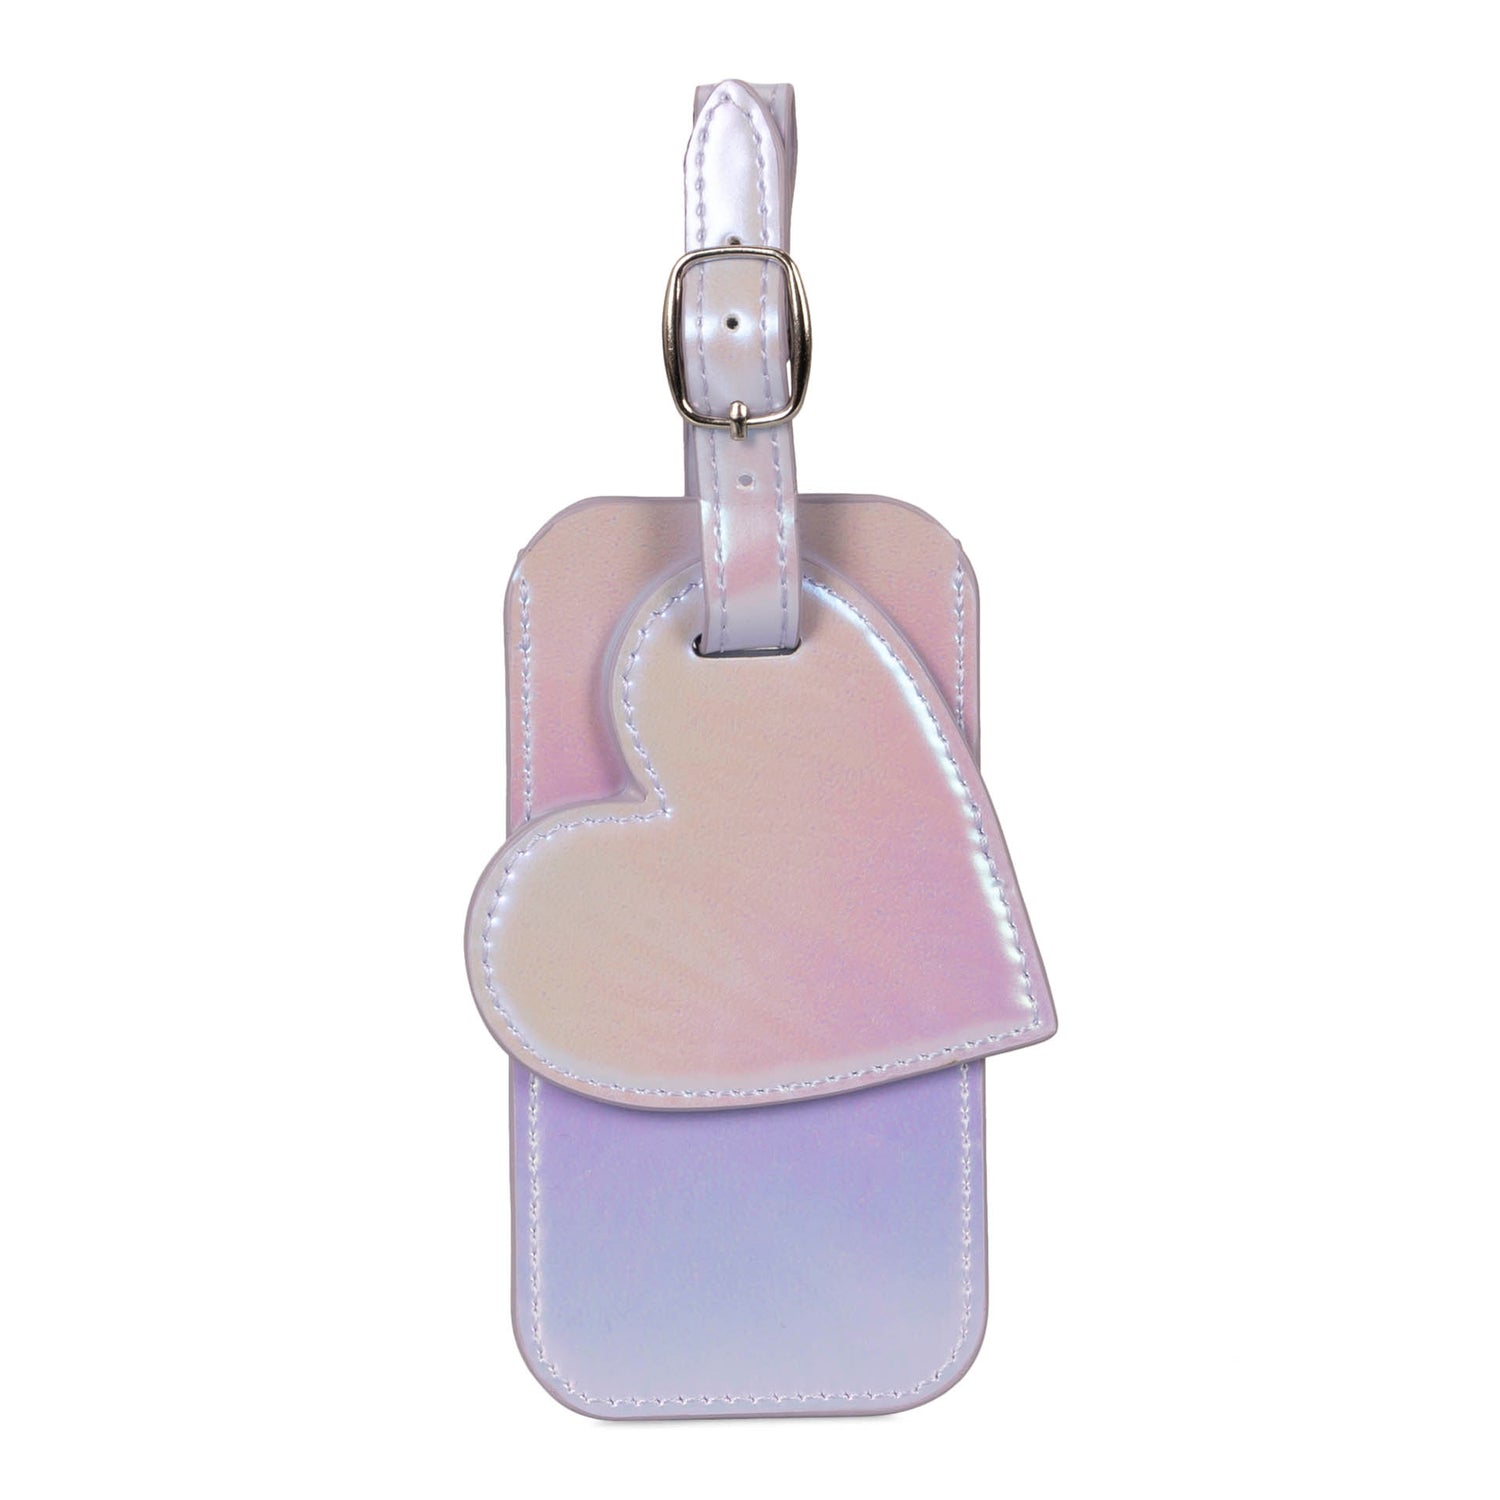 Back side of a purple metallic luggage id tag designed by Tracker showing a dangling heart and belt strap.